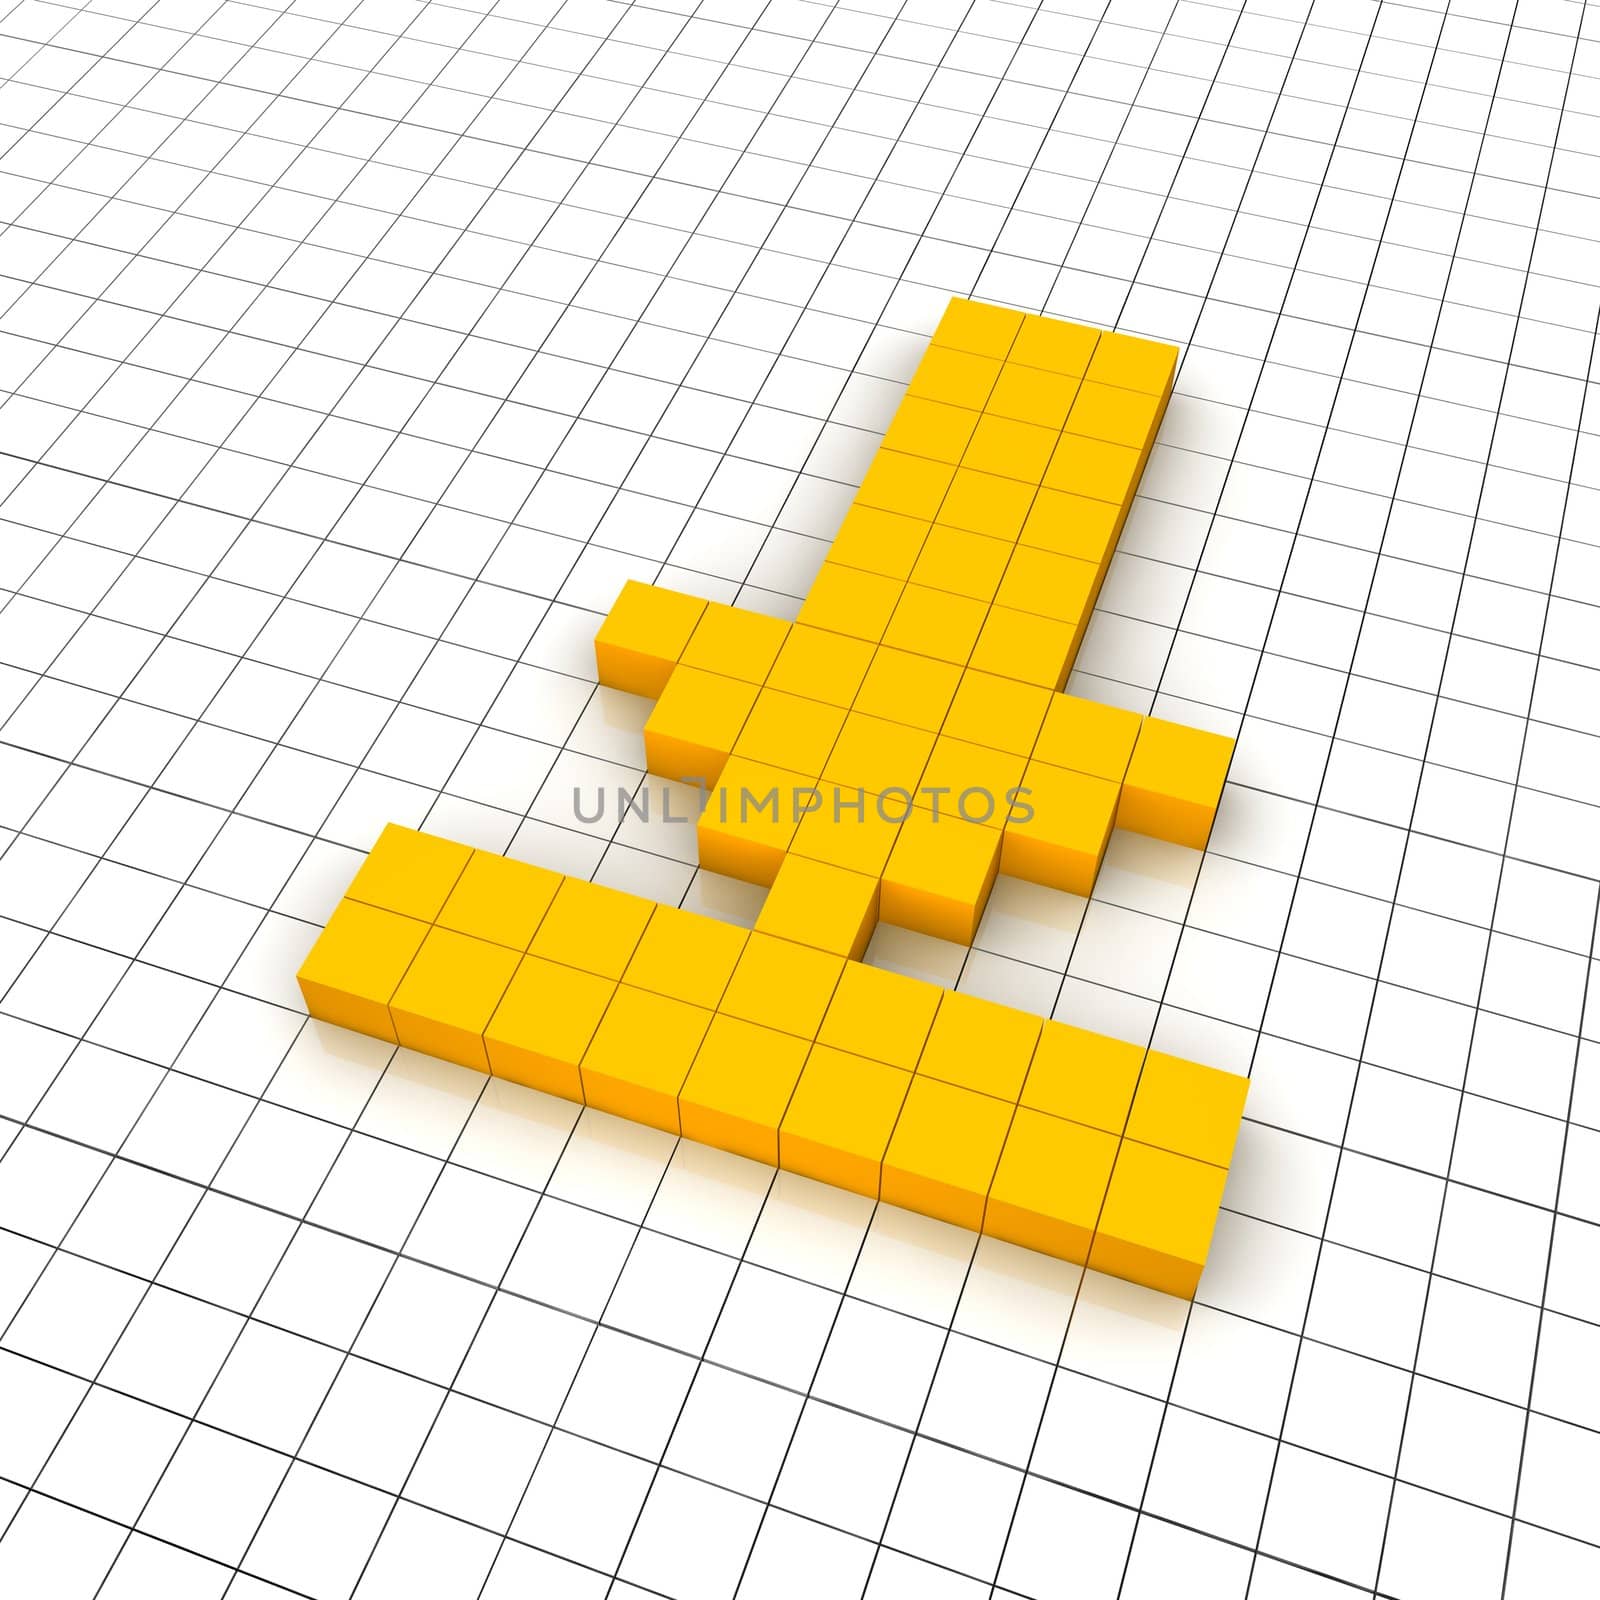 Download 3d icon in grid. Rendered illustration.